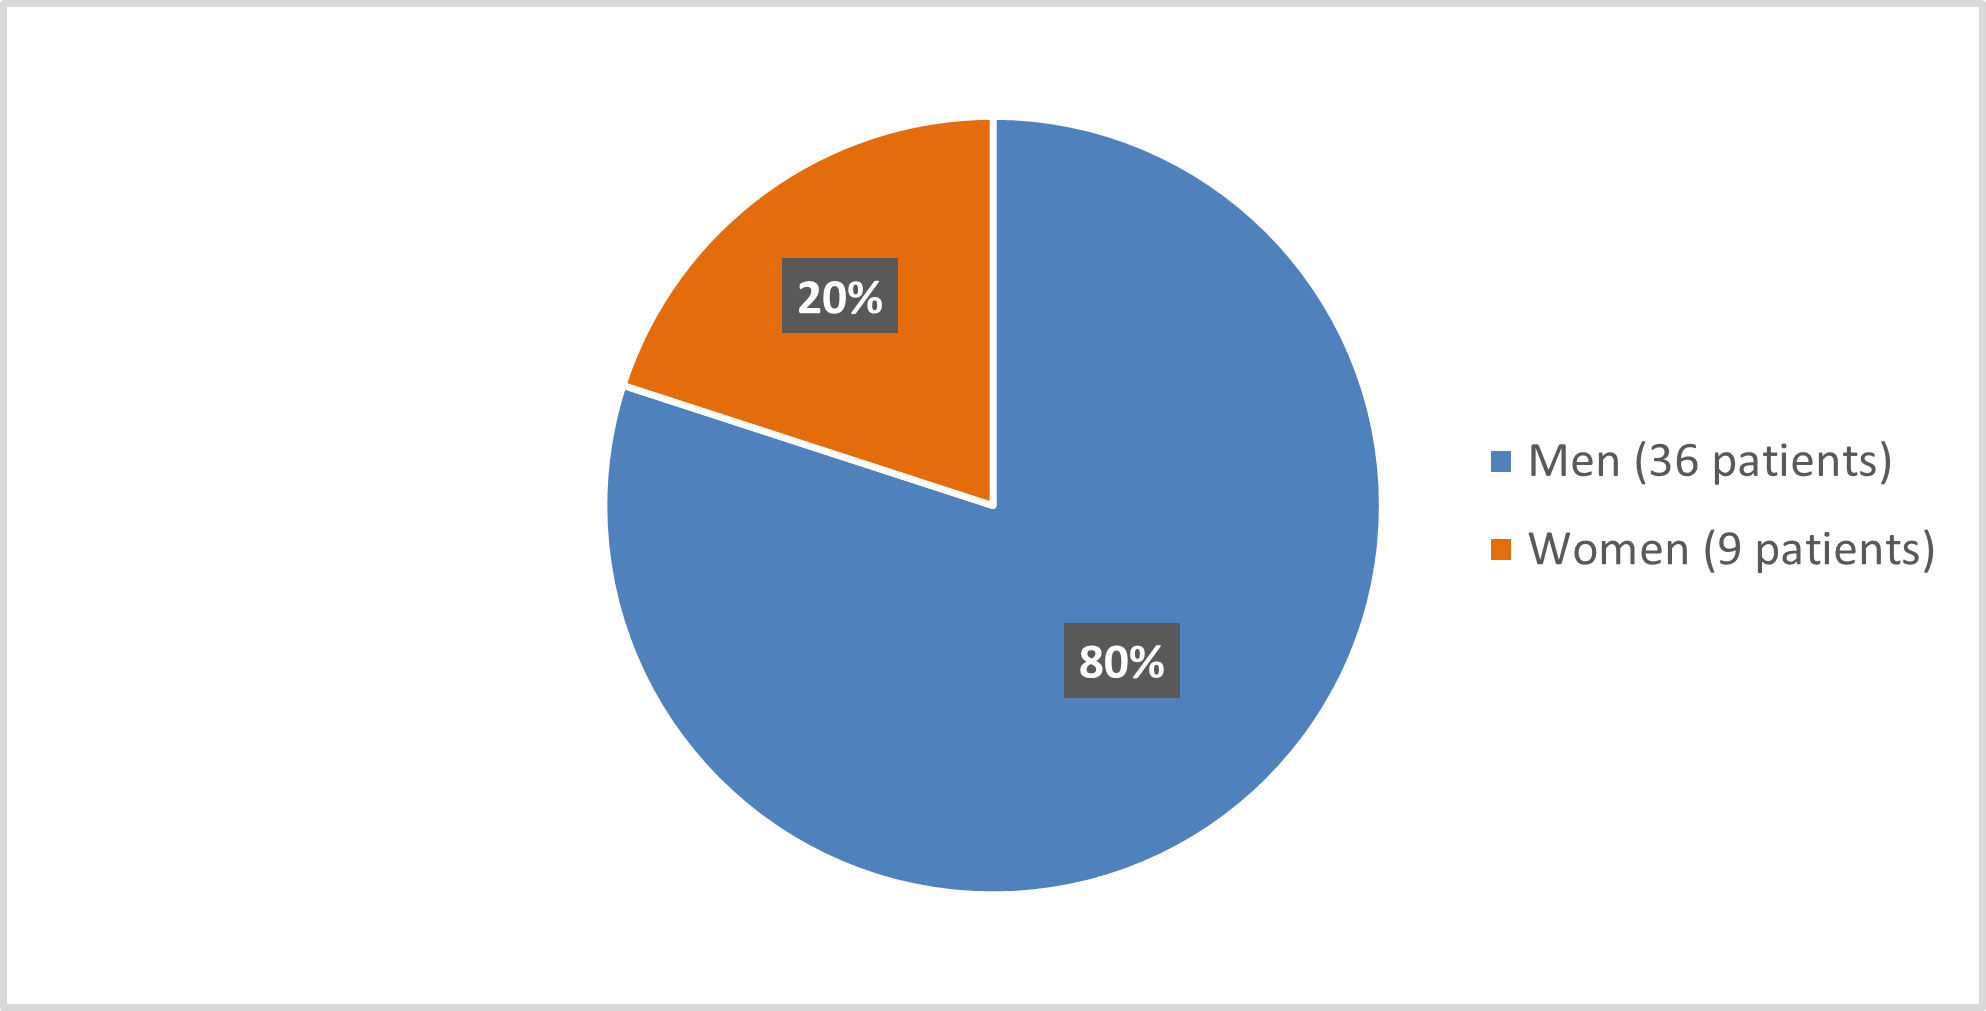 Pie chart summarizing how many men and women were in the clinical trial. In total, 36 (80%) men and 9 (20%) women participated in the clinical trial.